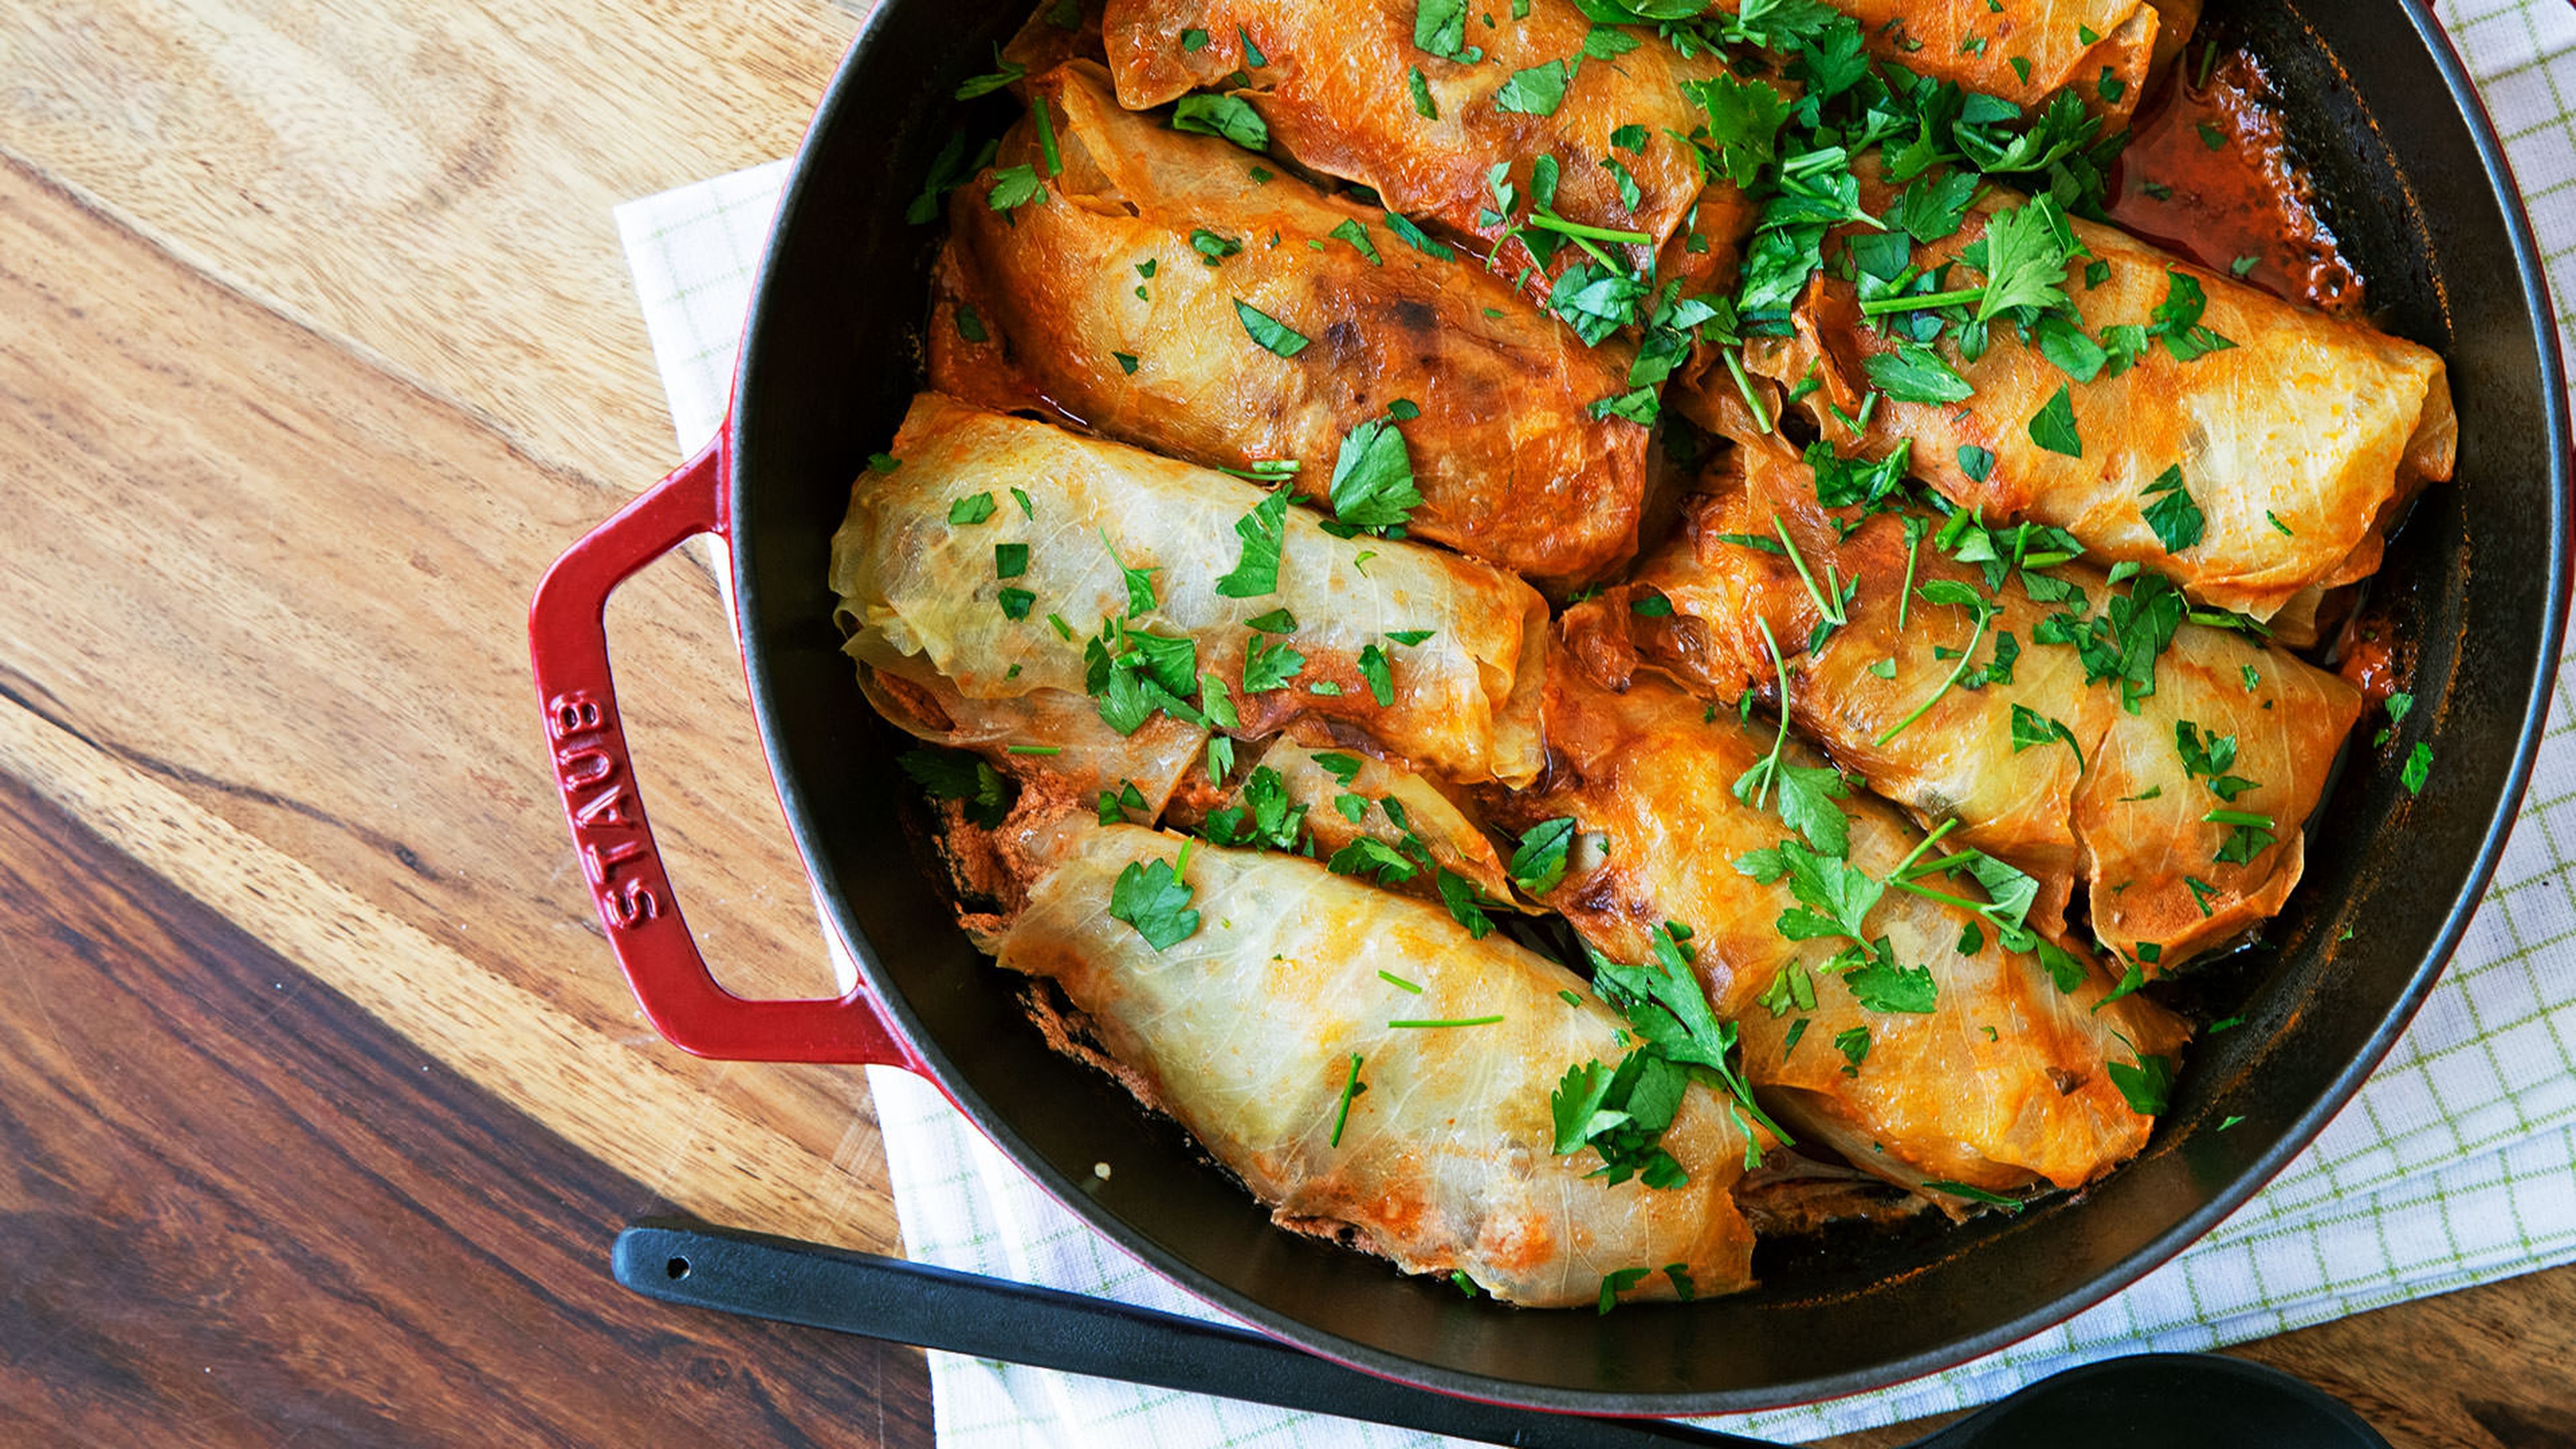 Stuffed cabbage rolls with creamy tomato sauce